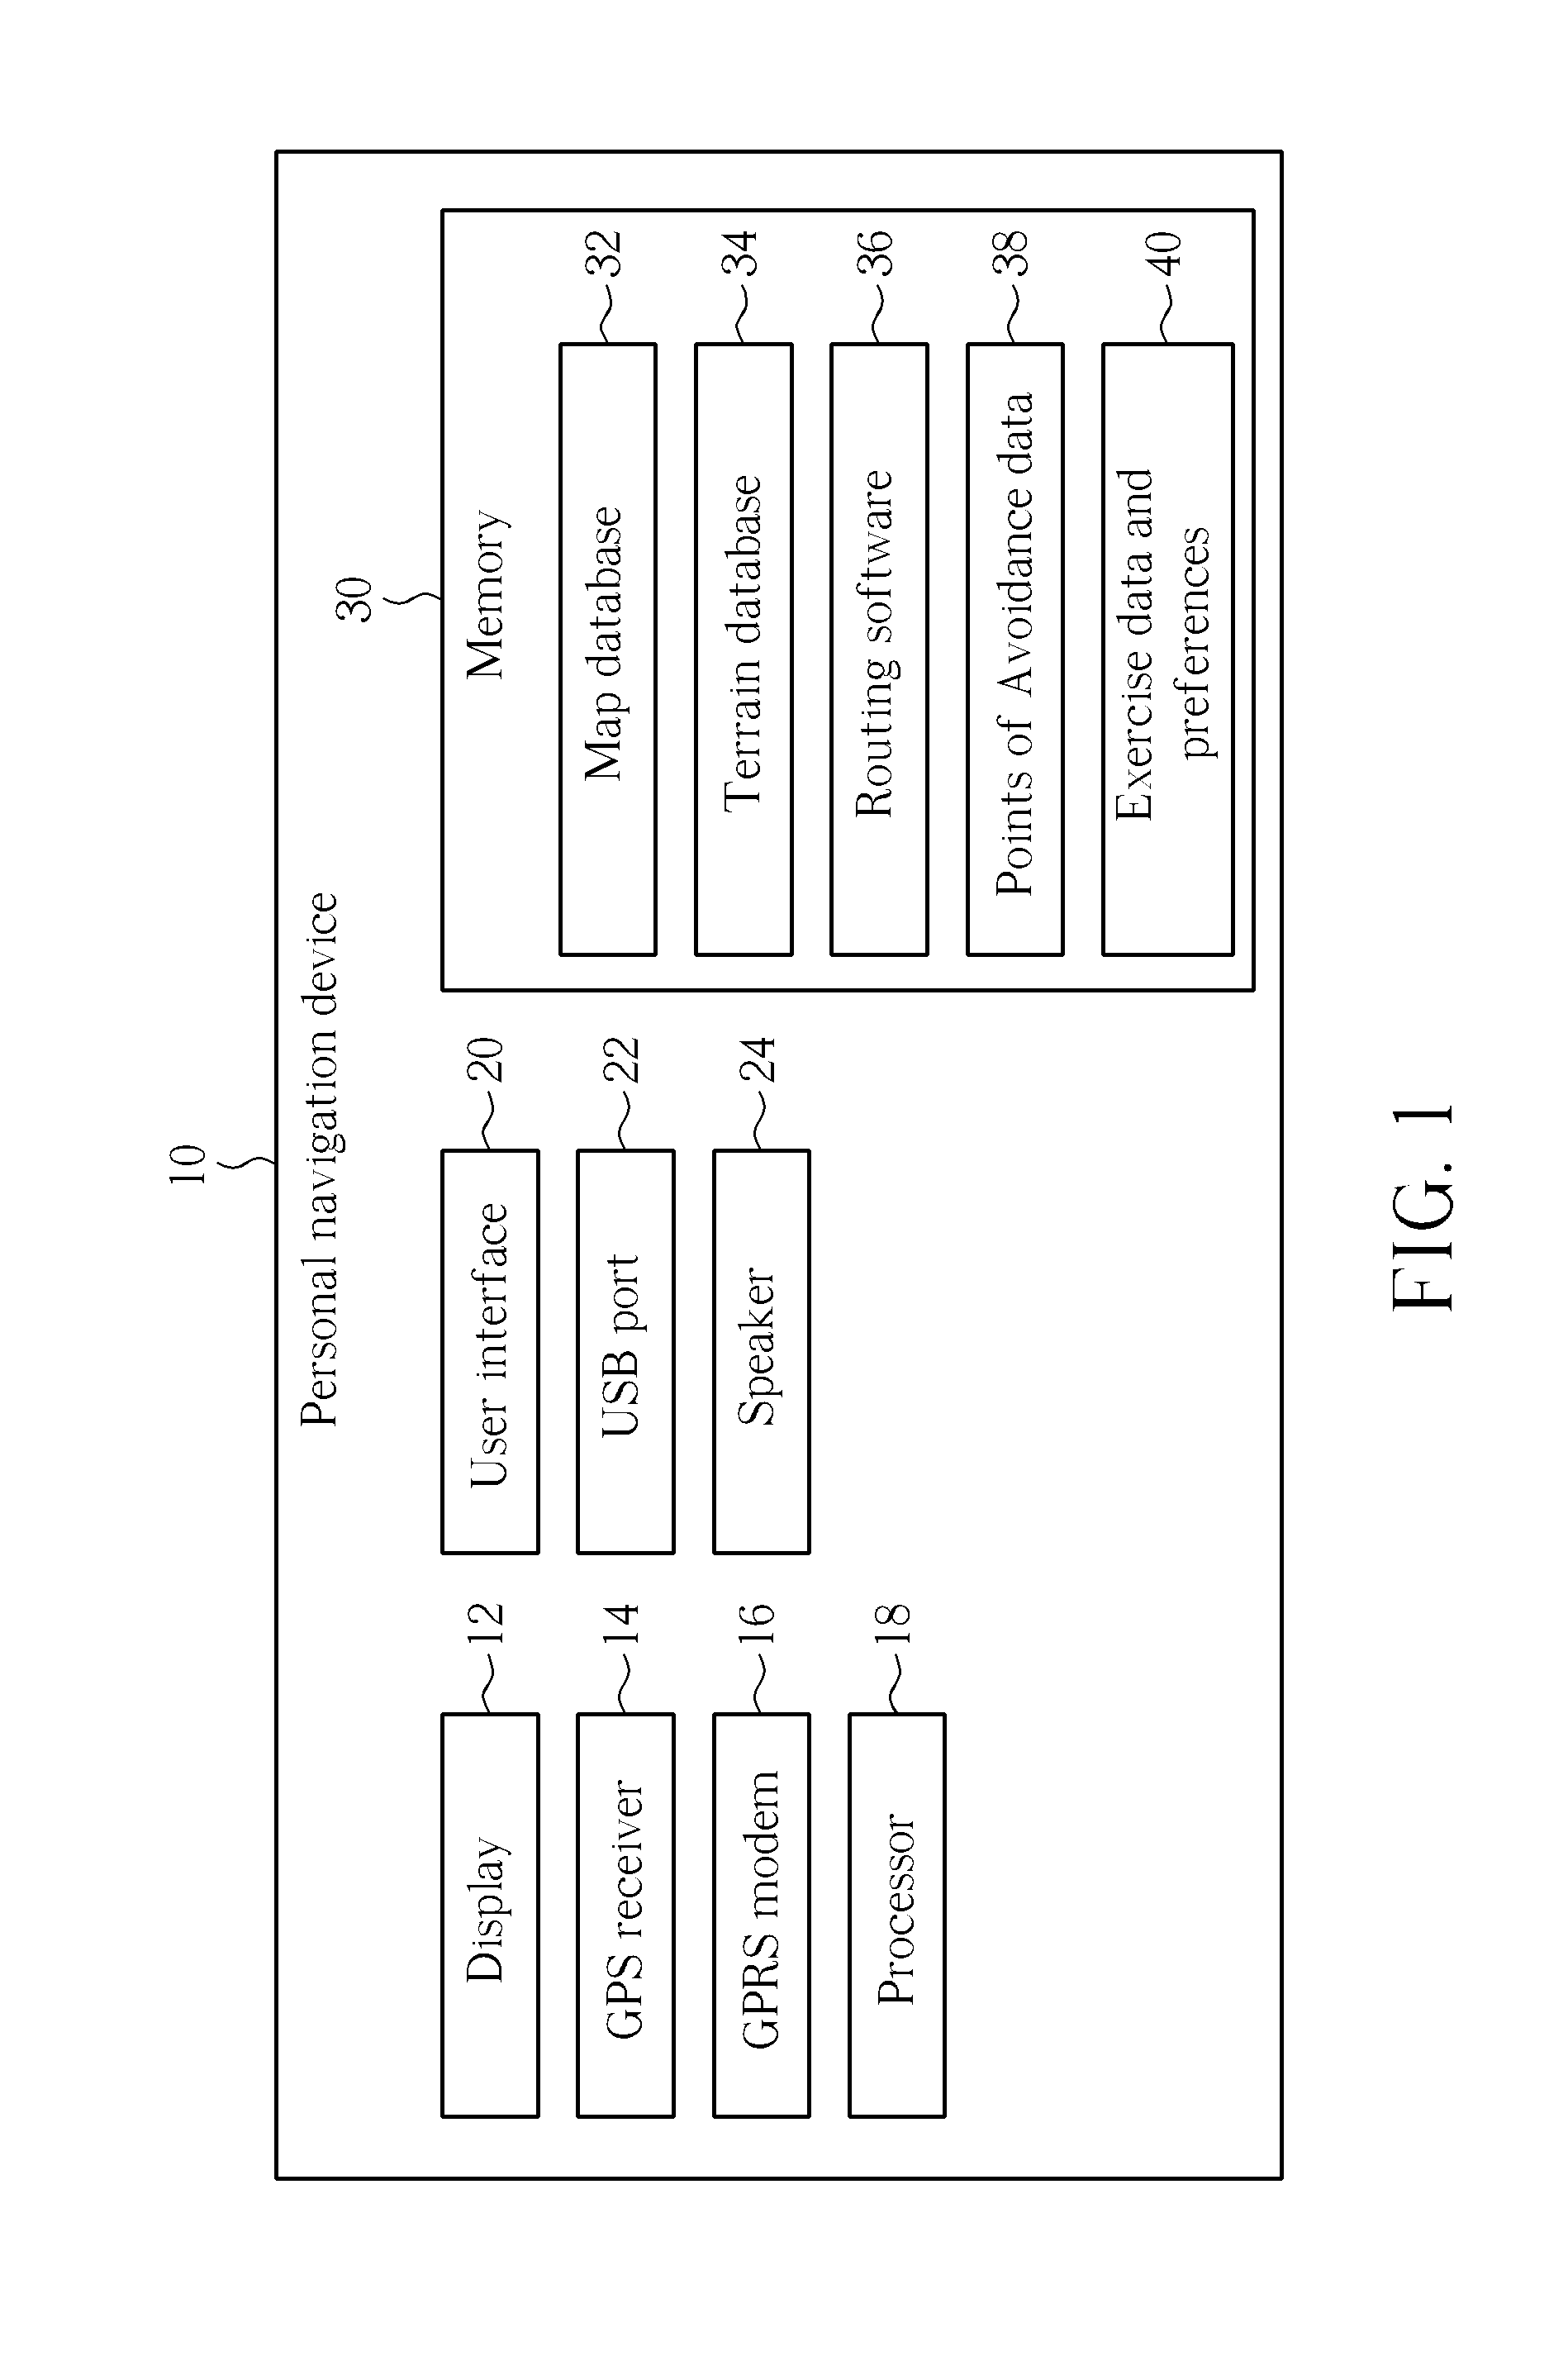 Method of creating varied exercise routes for a user